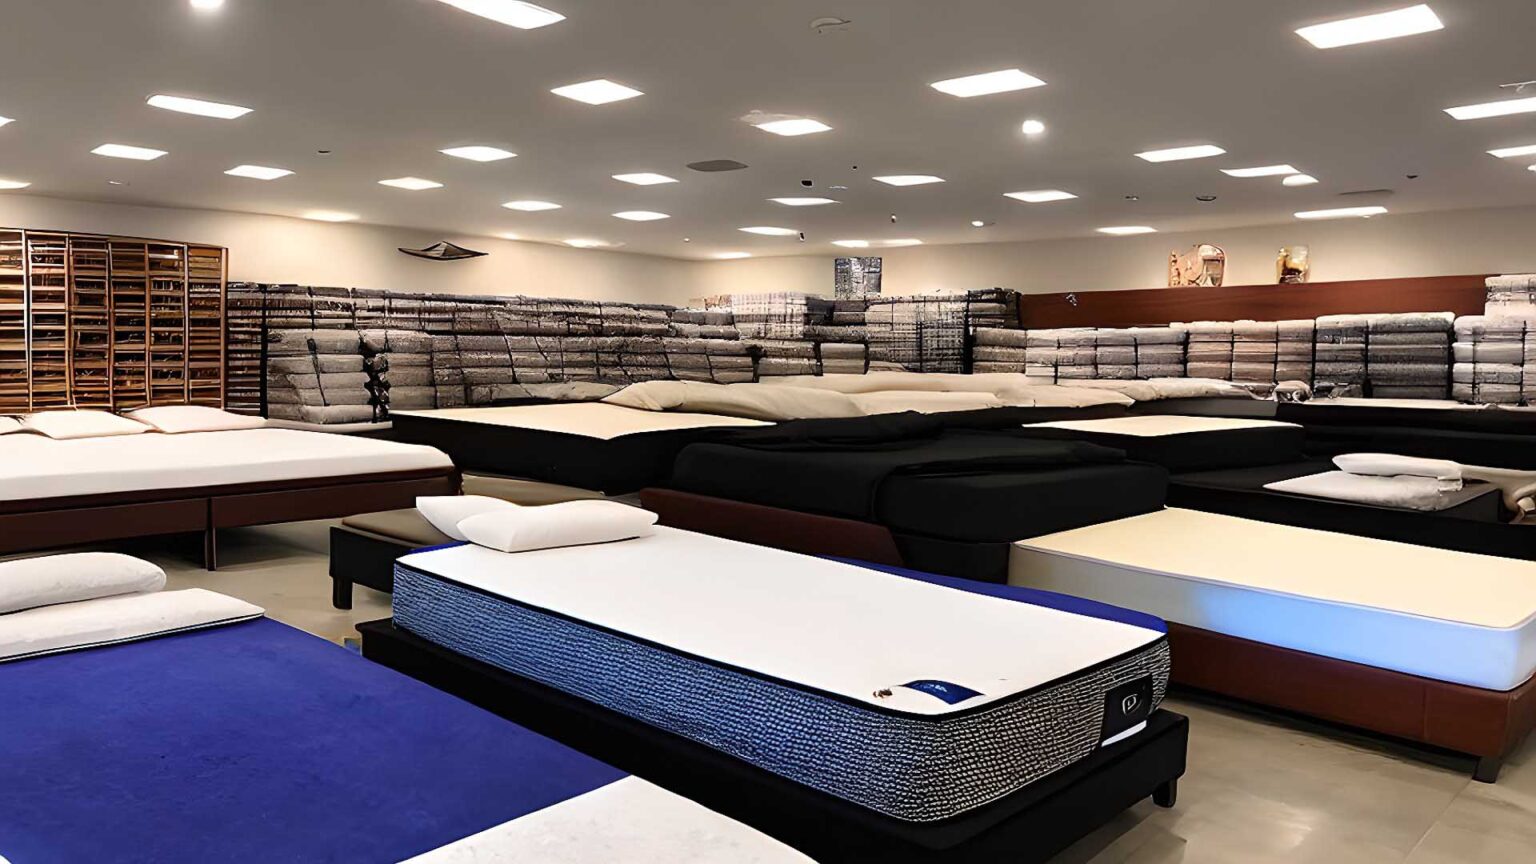 Mattress Stores, mattress dealers, and mattress retailers near me in Simi Valley, CA